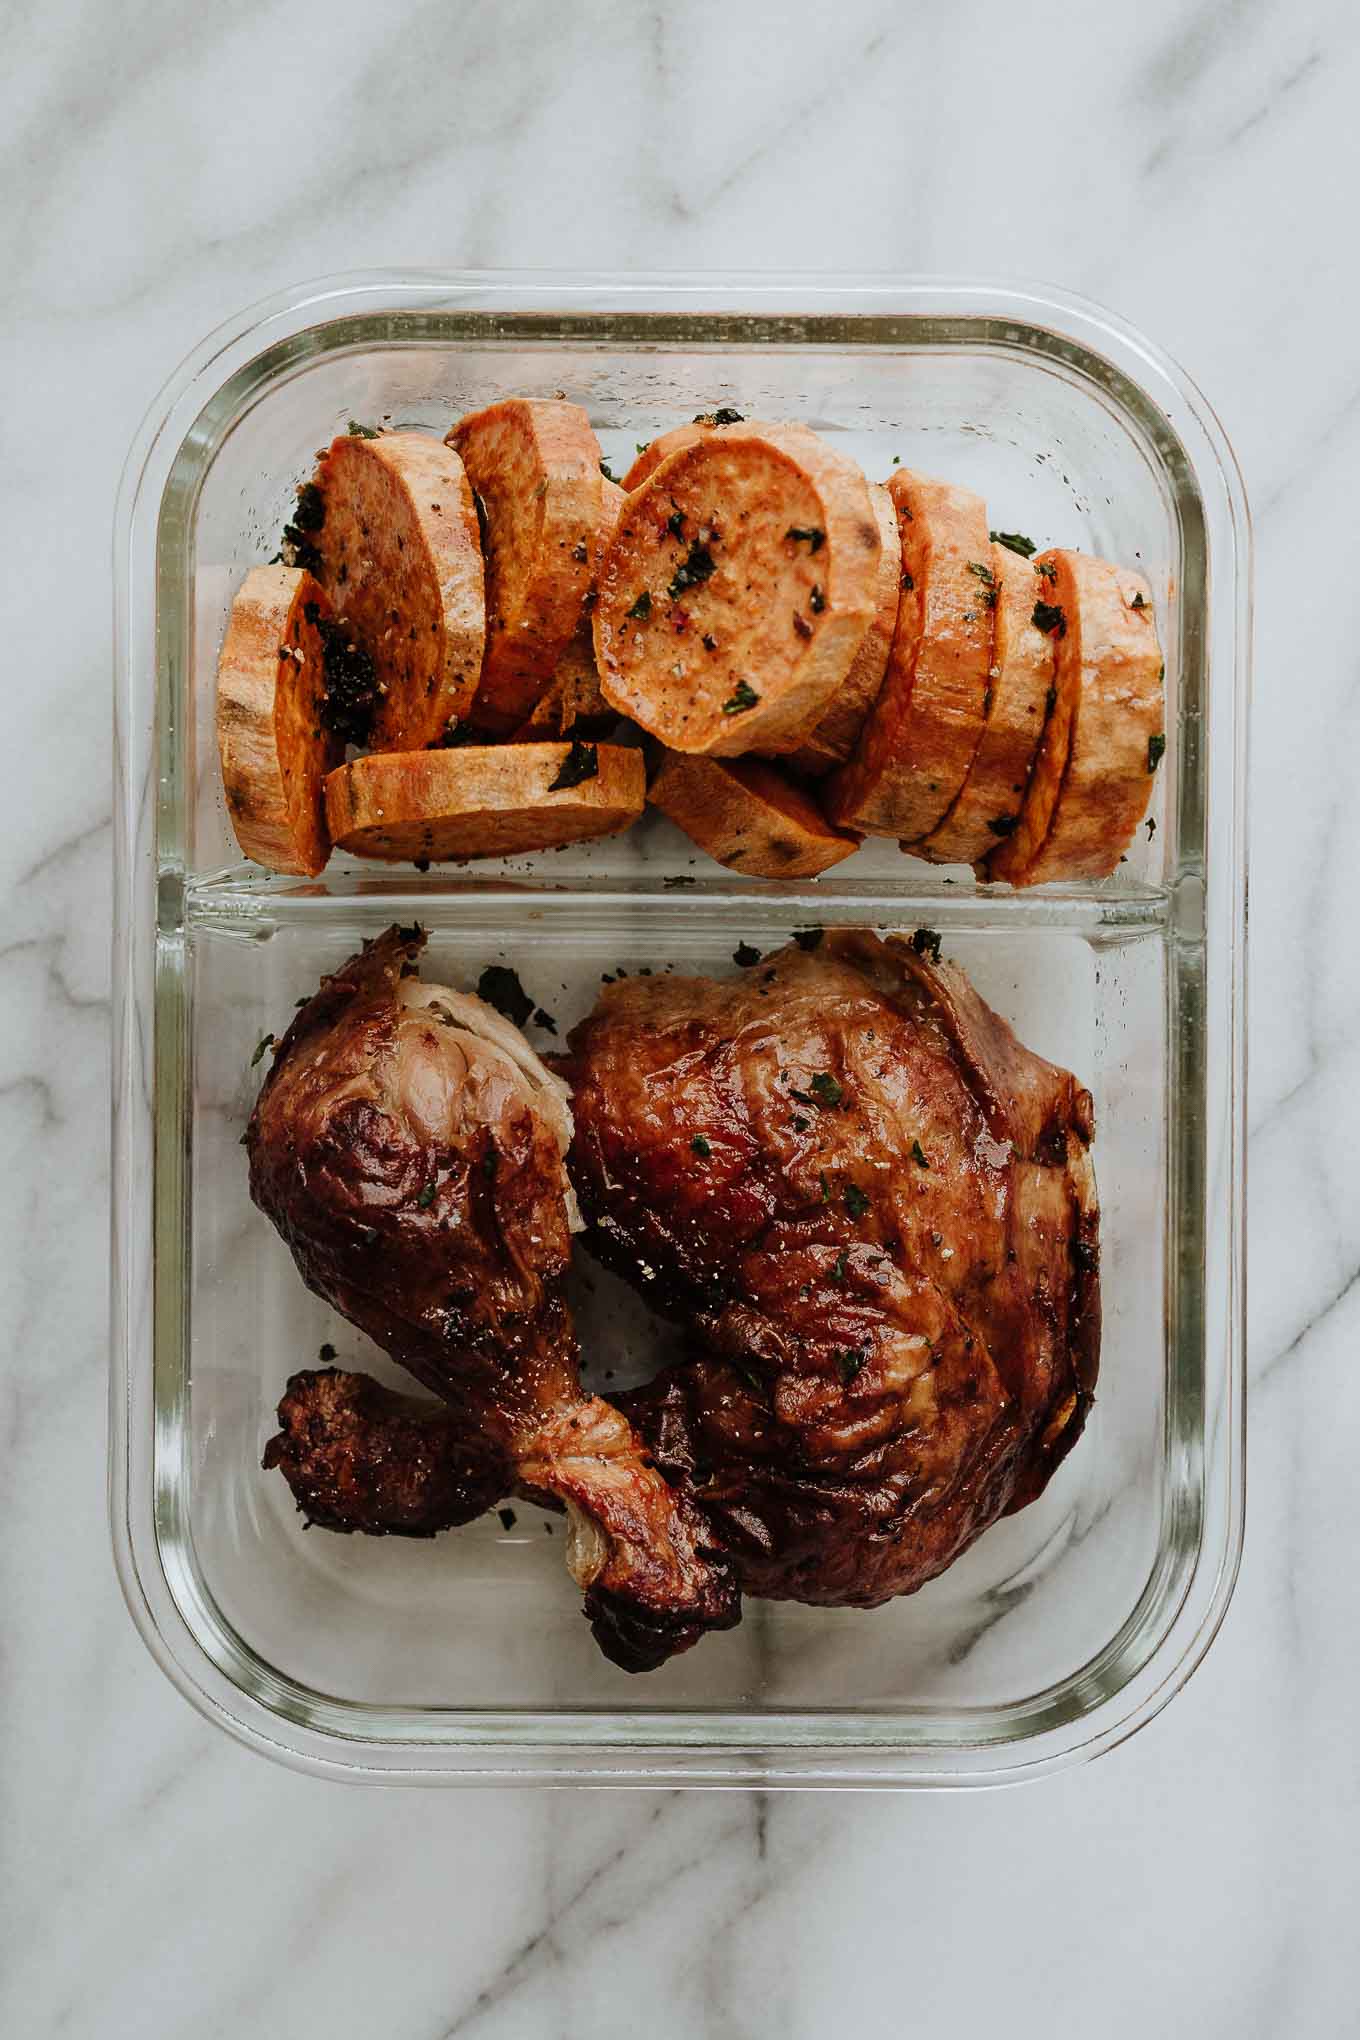 5 Easy Meals to Prep with 1 Rotisserie Chicken. Healthy lunches that help you clean out your fridge and save time! #mealprep #healthymealprep #mealplanning #rotisseriechicken